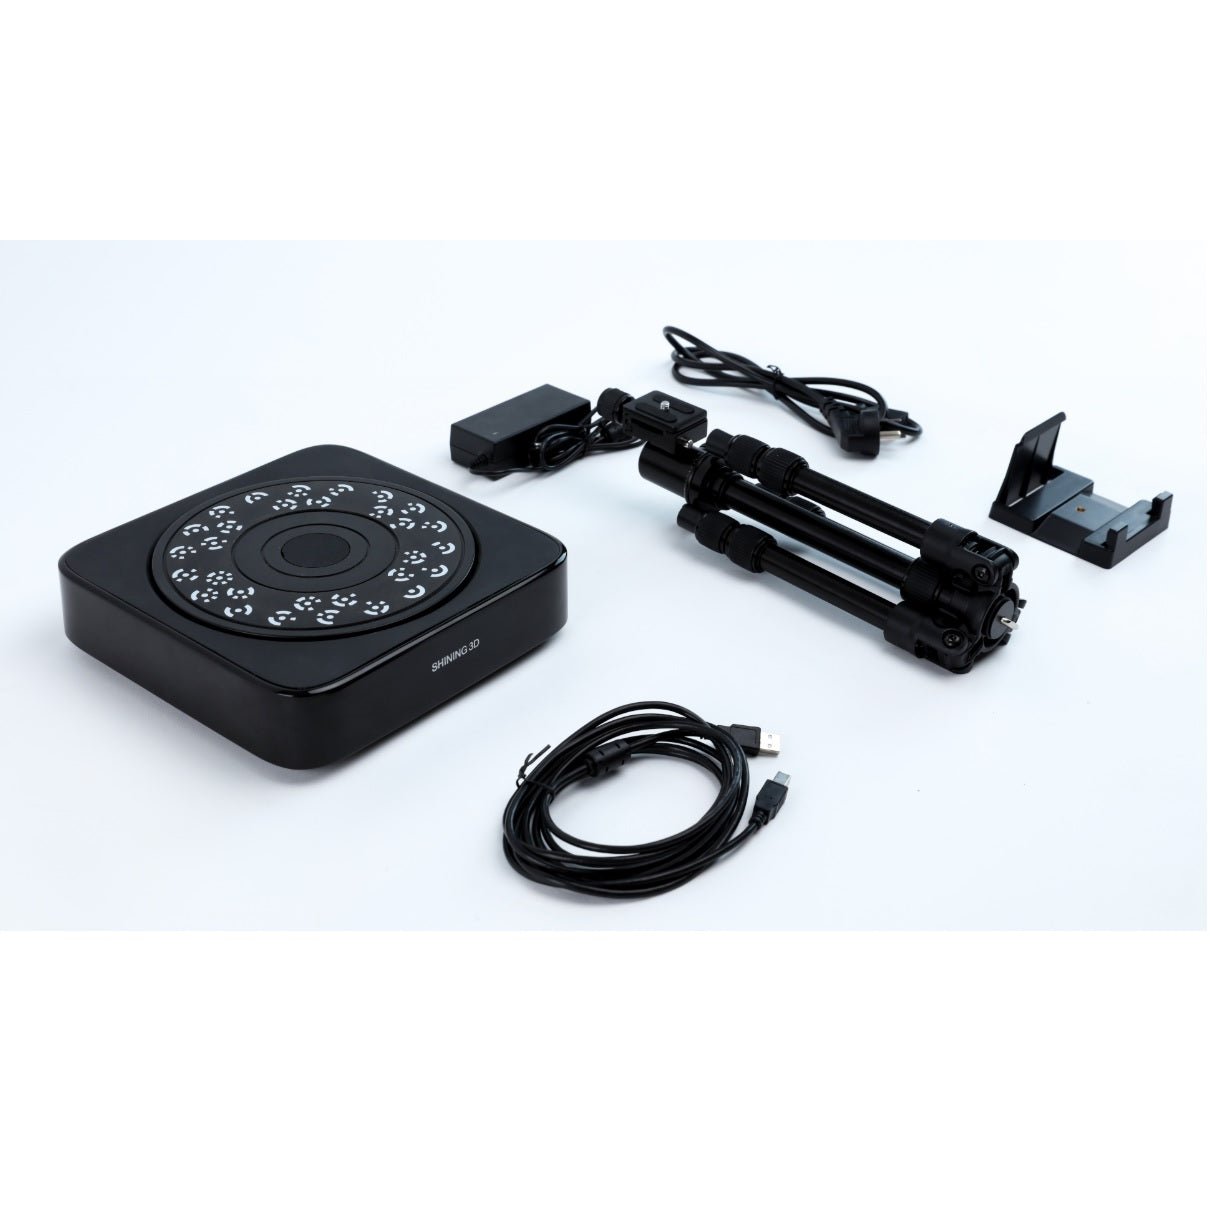 Tripod and Turntable Add - on for EinScan - Pro 2X and EinScan - Pro 2X PLUS - Micro - Mark Scanners